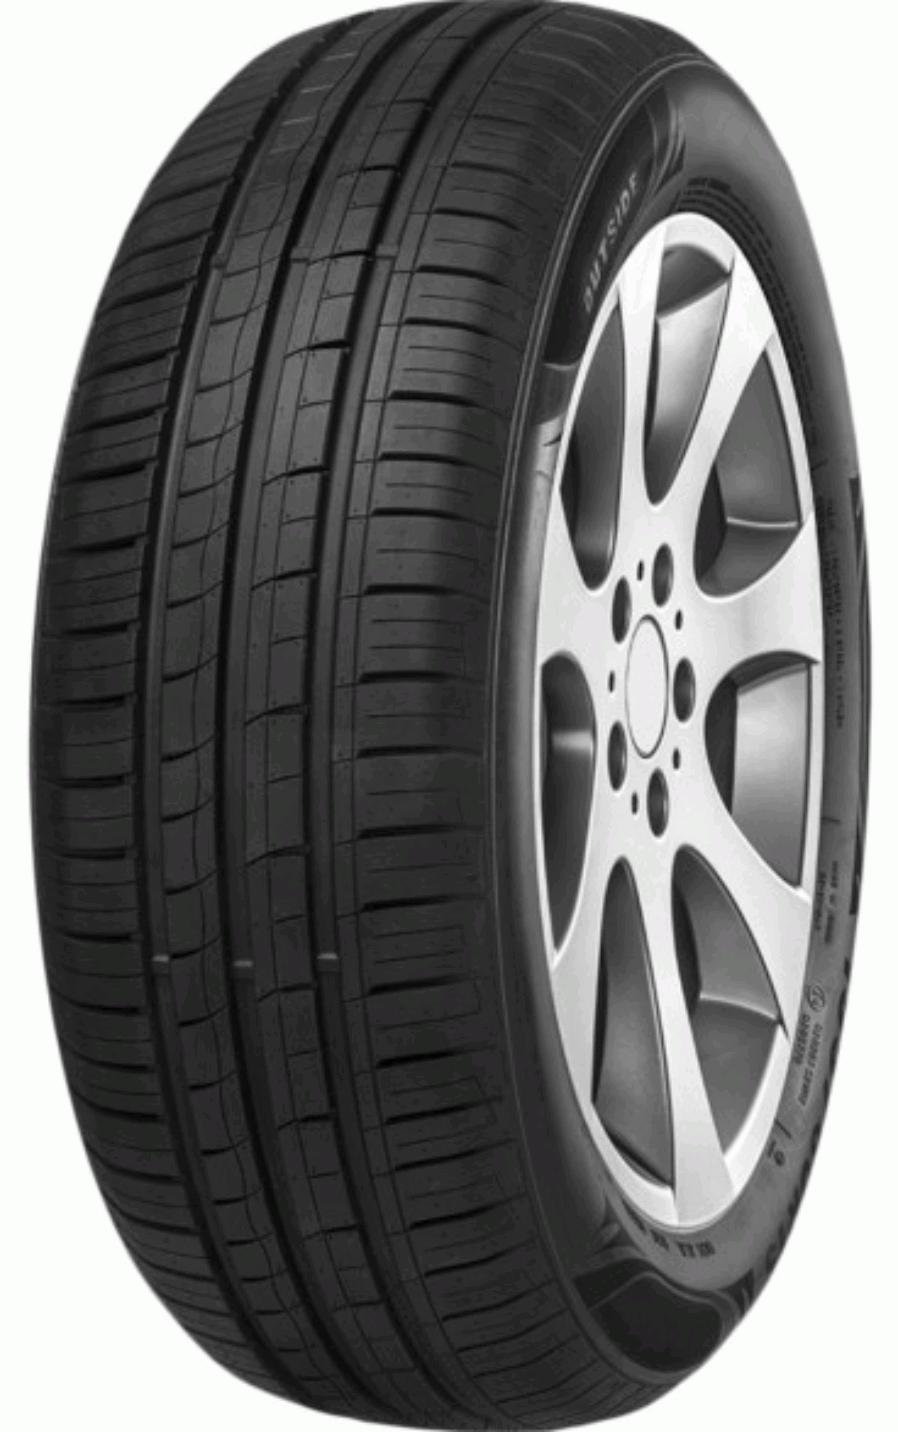 Imperial Ecodriver 4 Reviews Tyre Tests and 